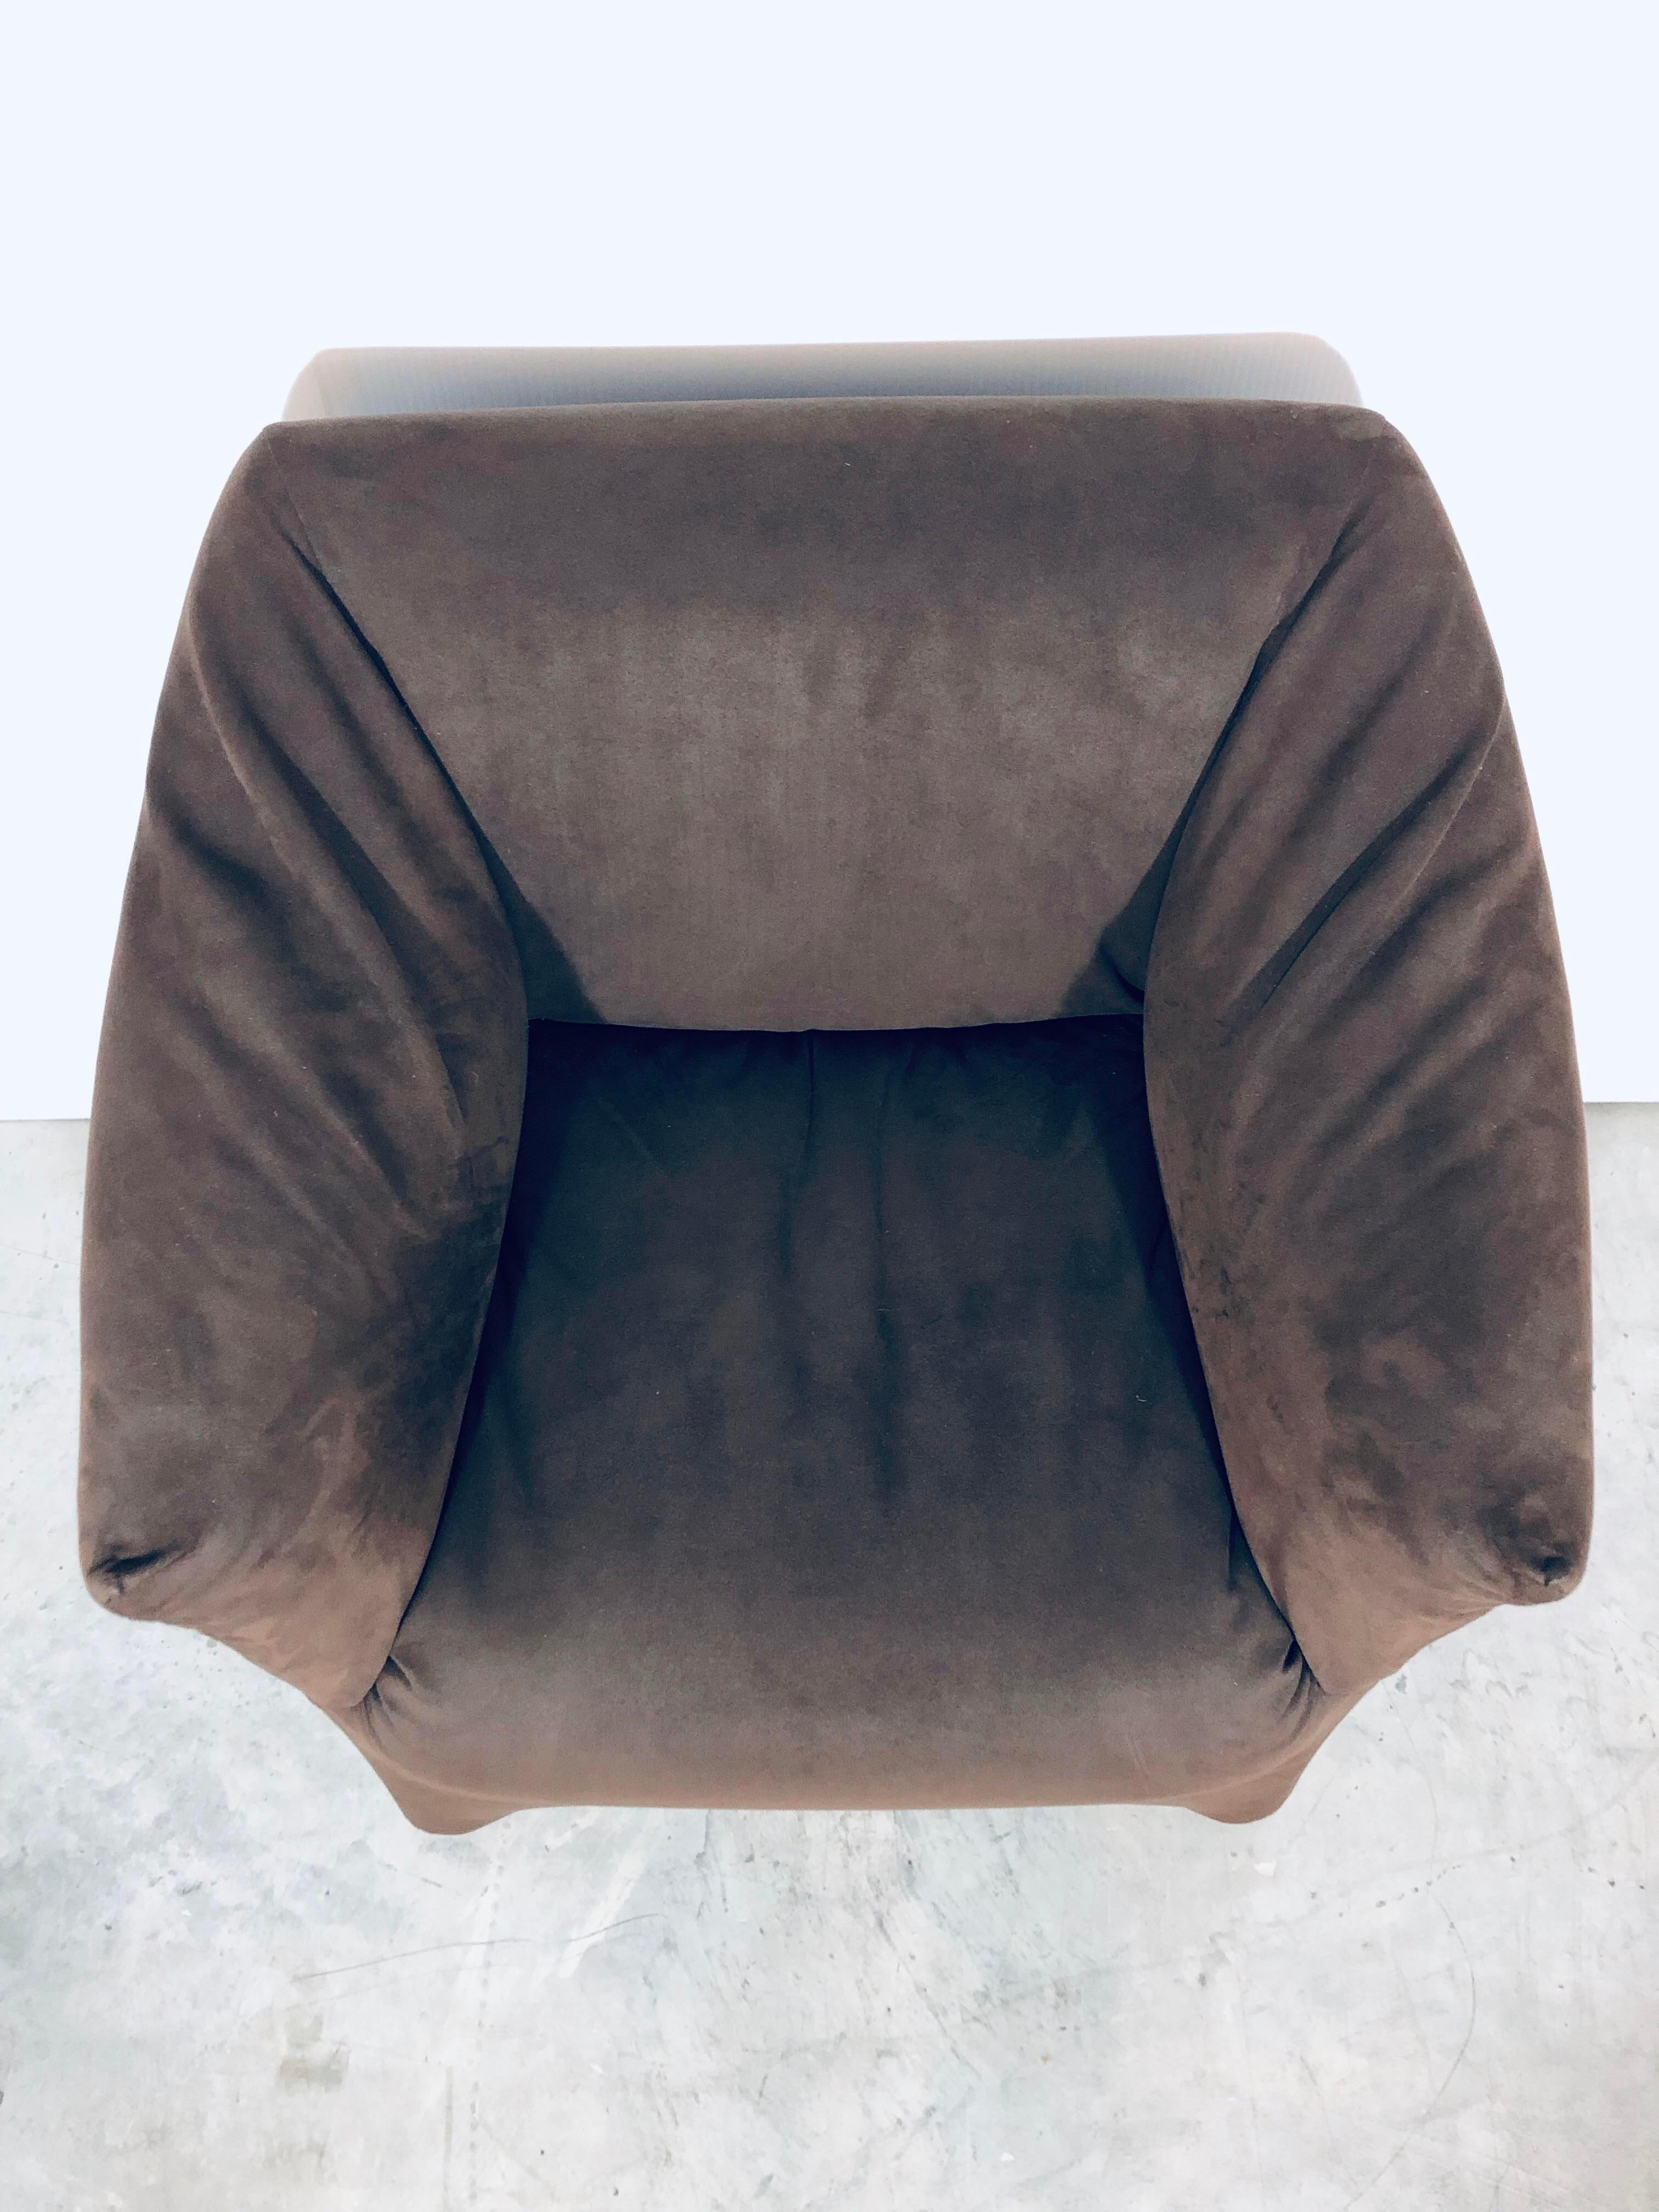 Leather Mario Bellini Brown Ultra Suede “Tentazione” Chair for Cassina, Italy, 1970s